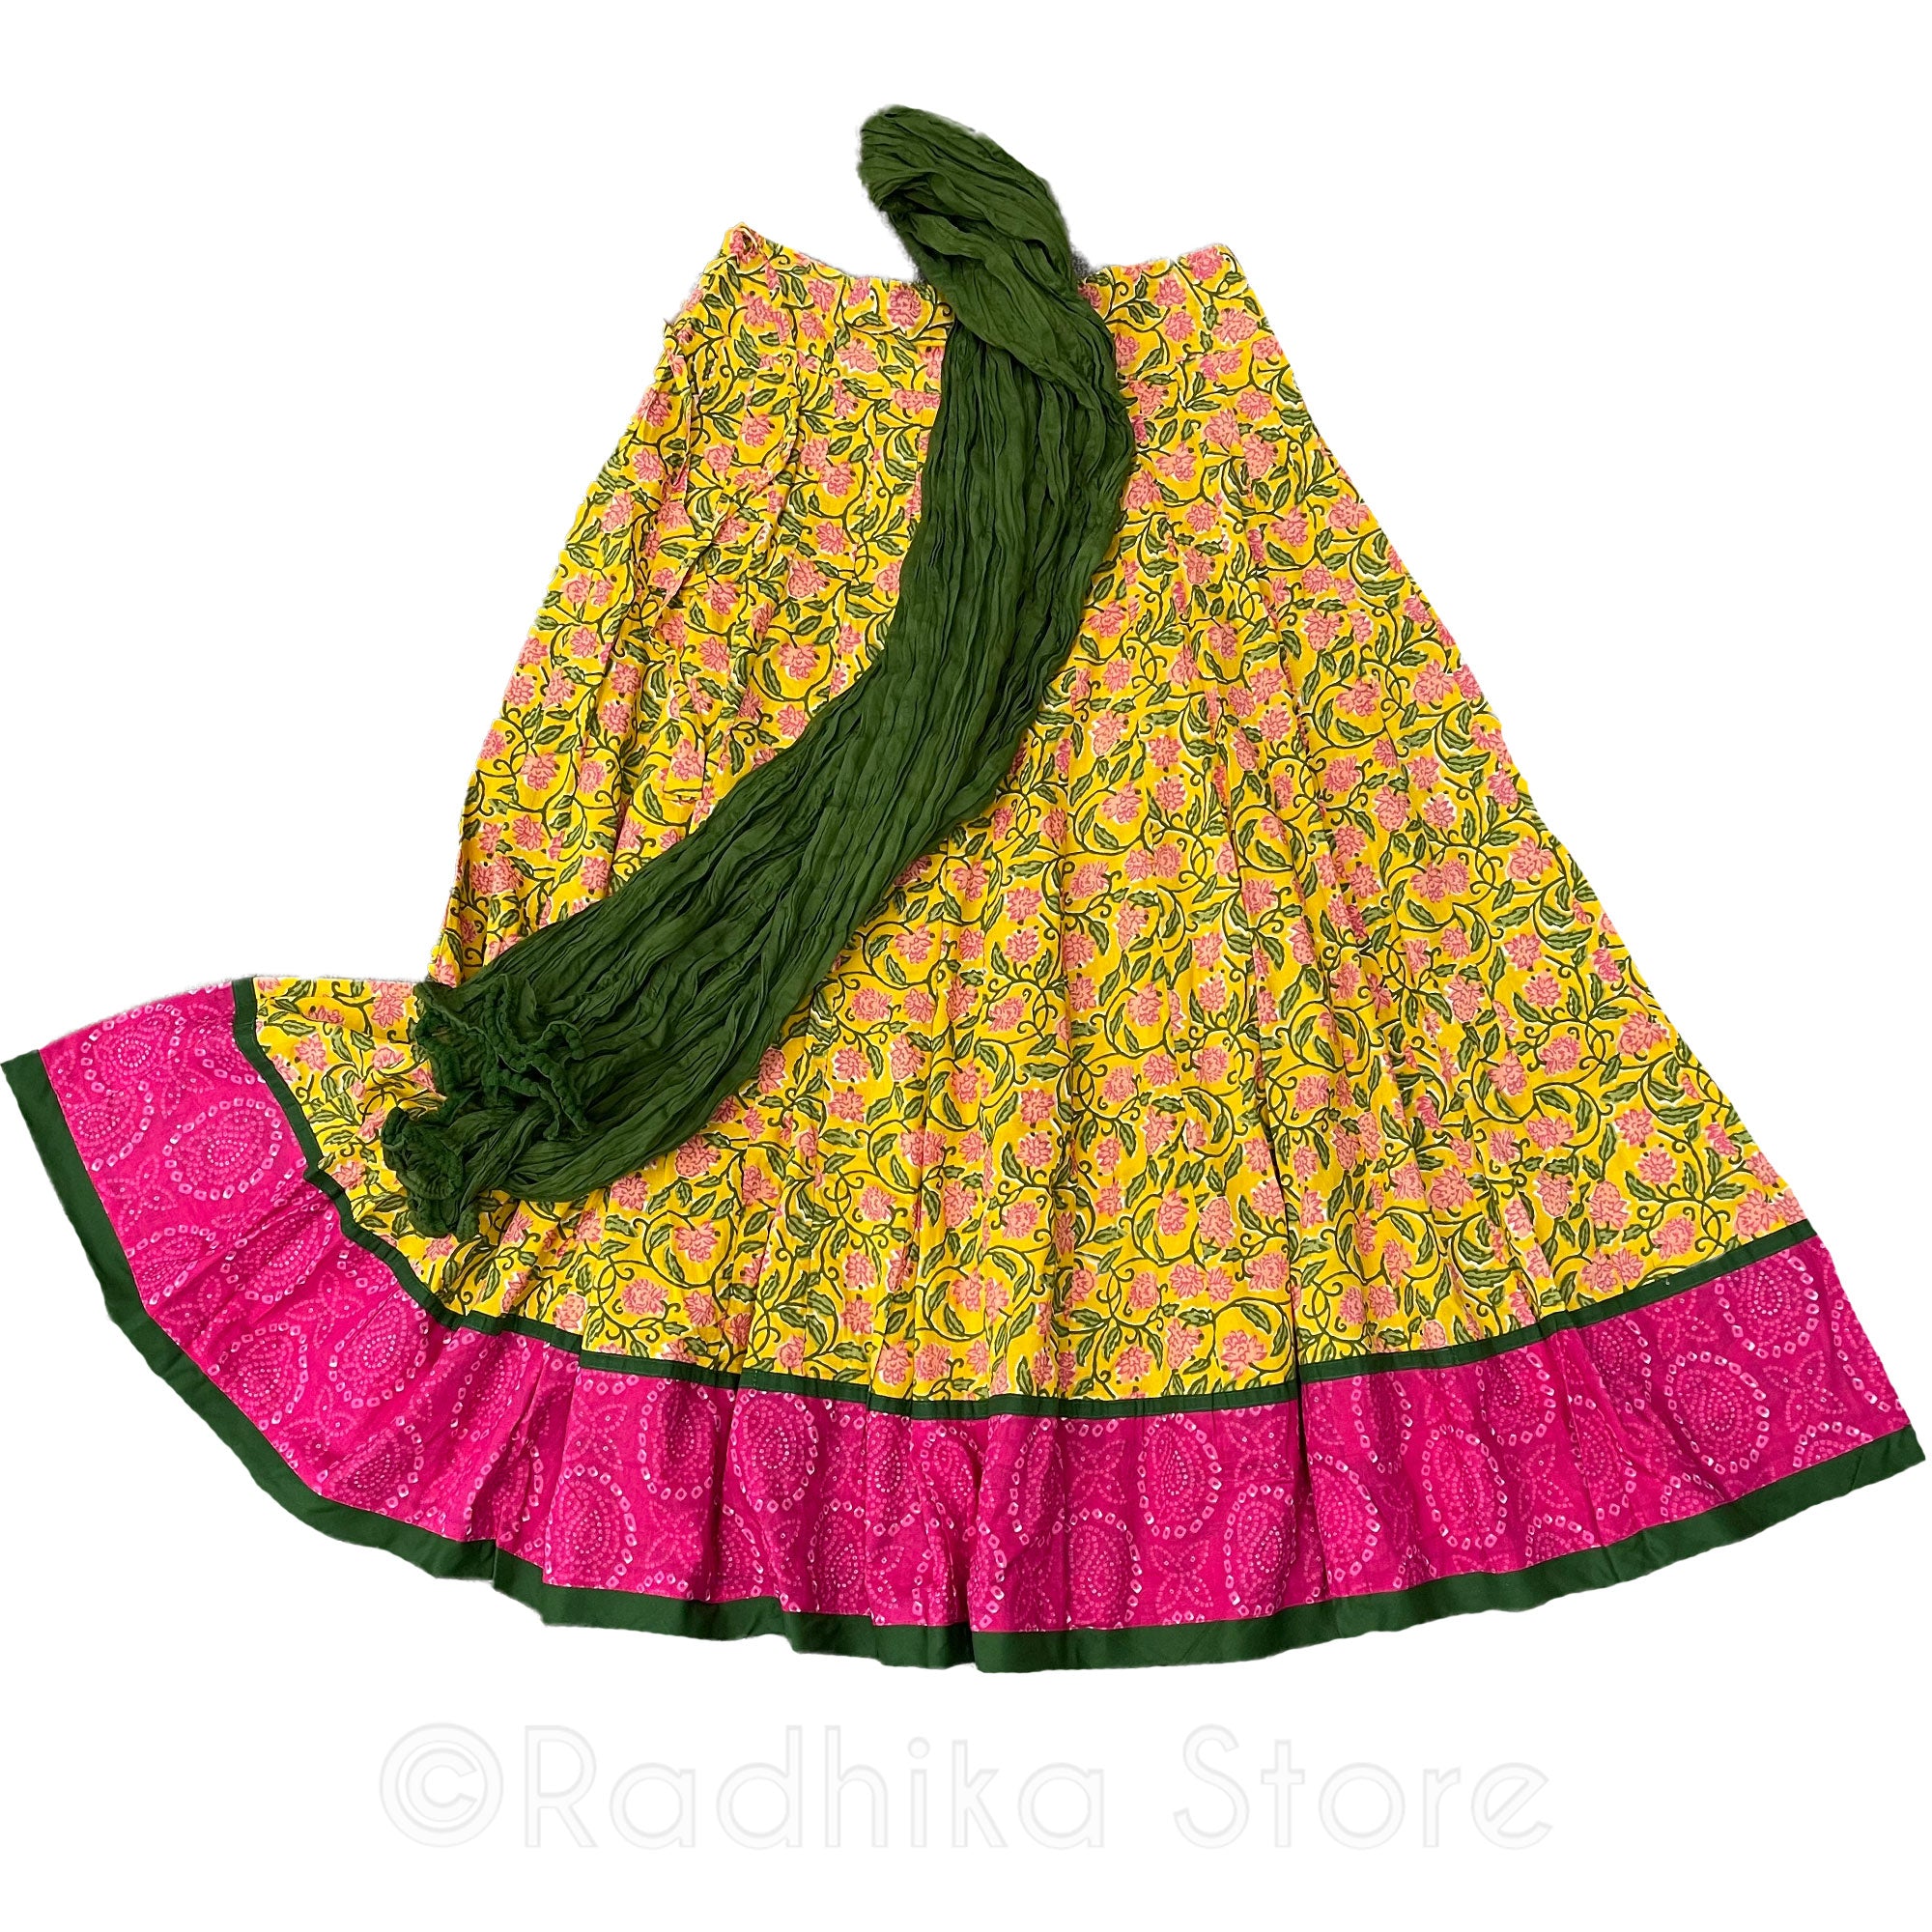 Varshana Palace Flowers - Gopi Skirt - Bright Yellow and Pink - Cotton Screen Print - With Chadar -L